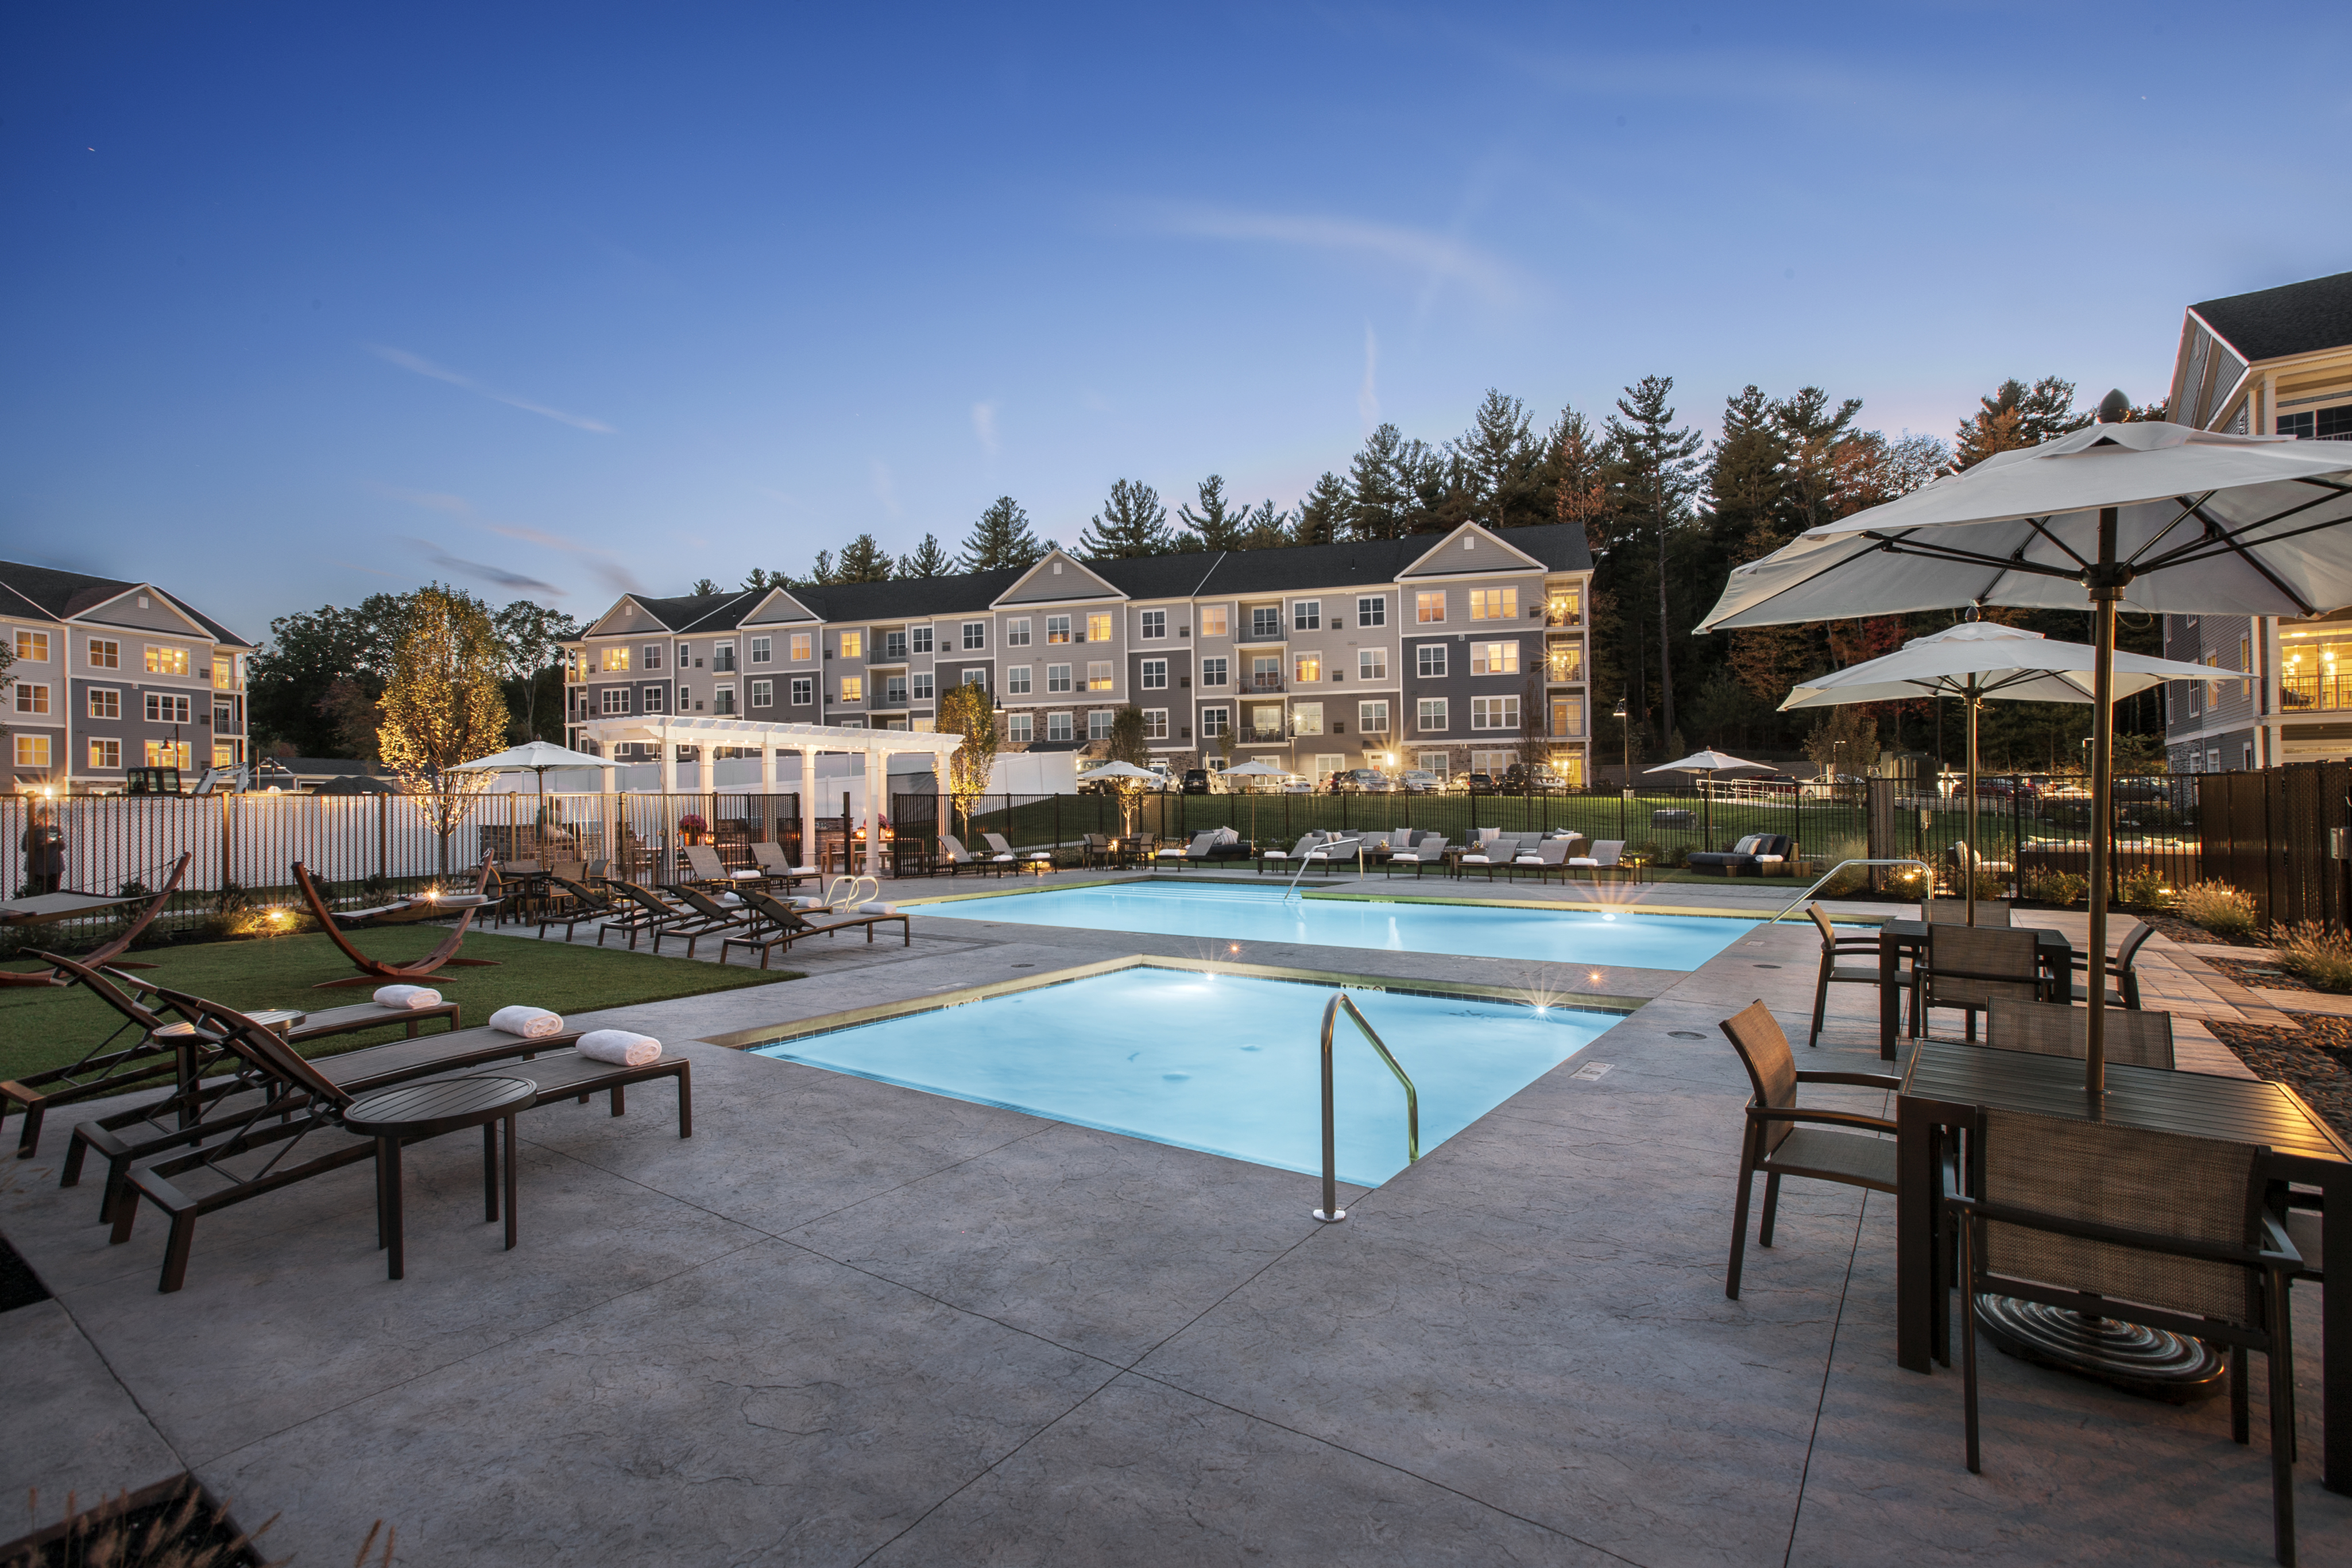 View of Pool Area, Showing Kiddie Pool, Loungers, Pergola, and Apartment Buildings in Background at Parc Westborough Apartments